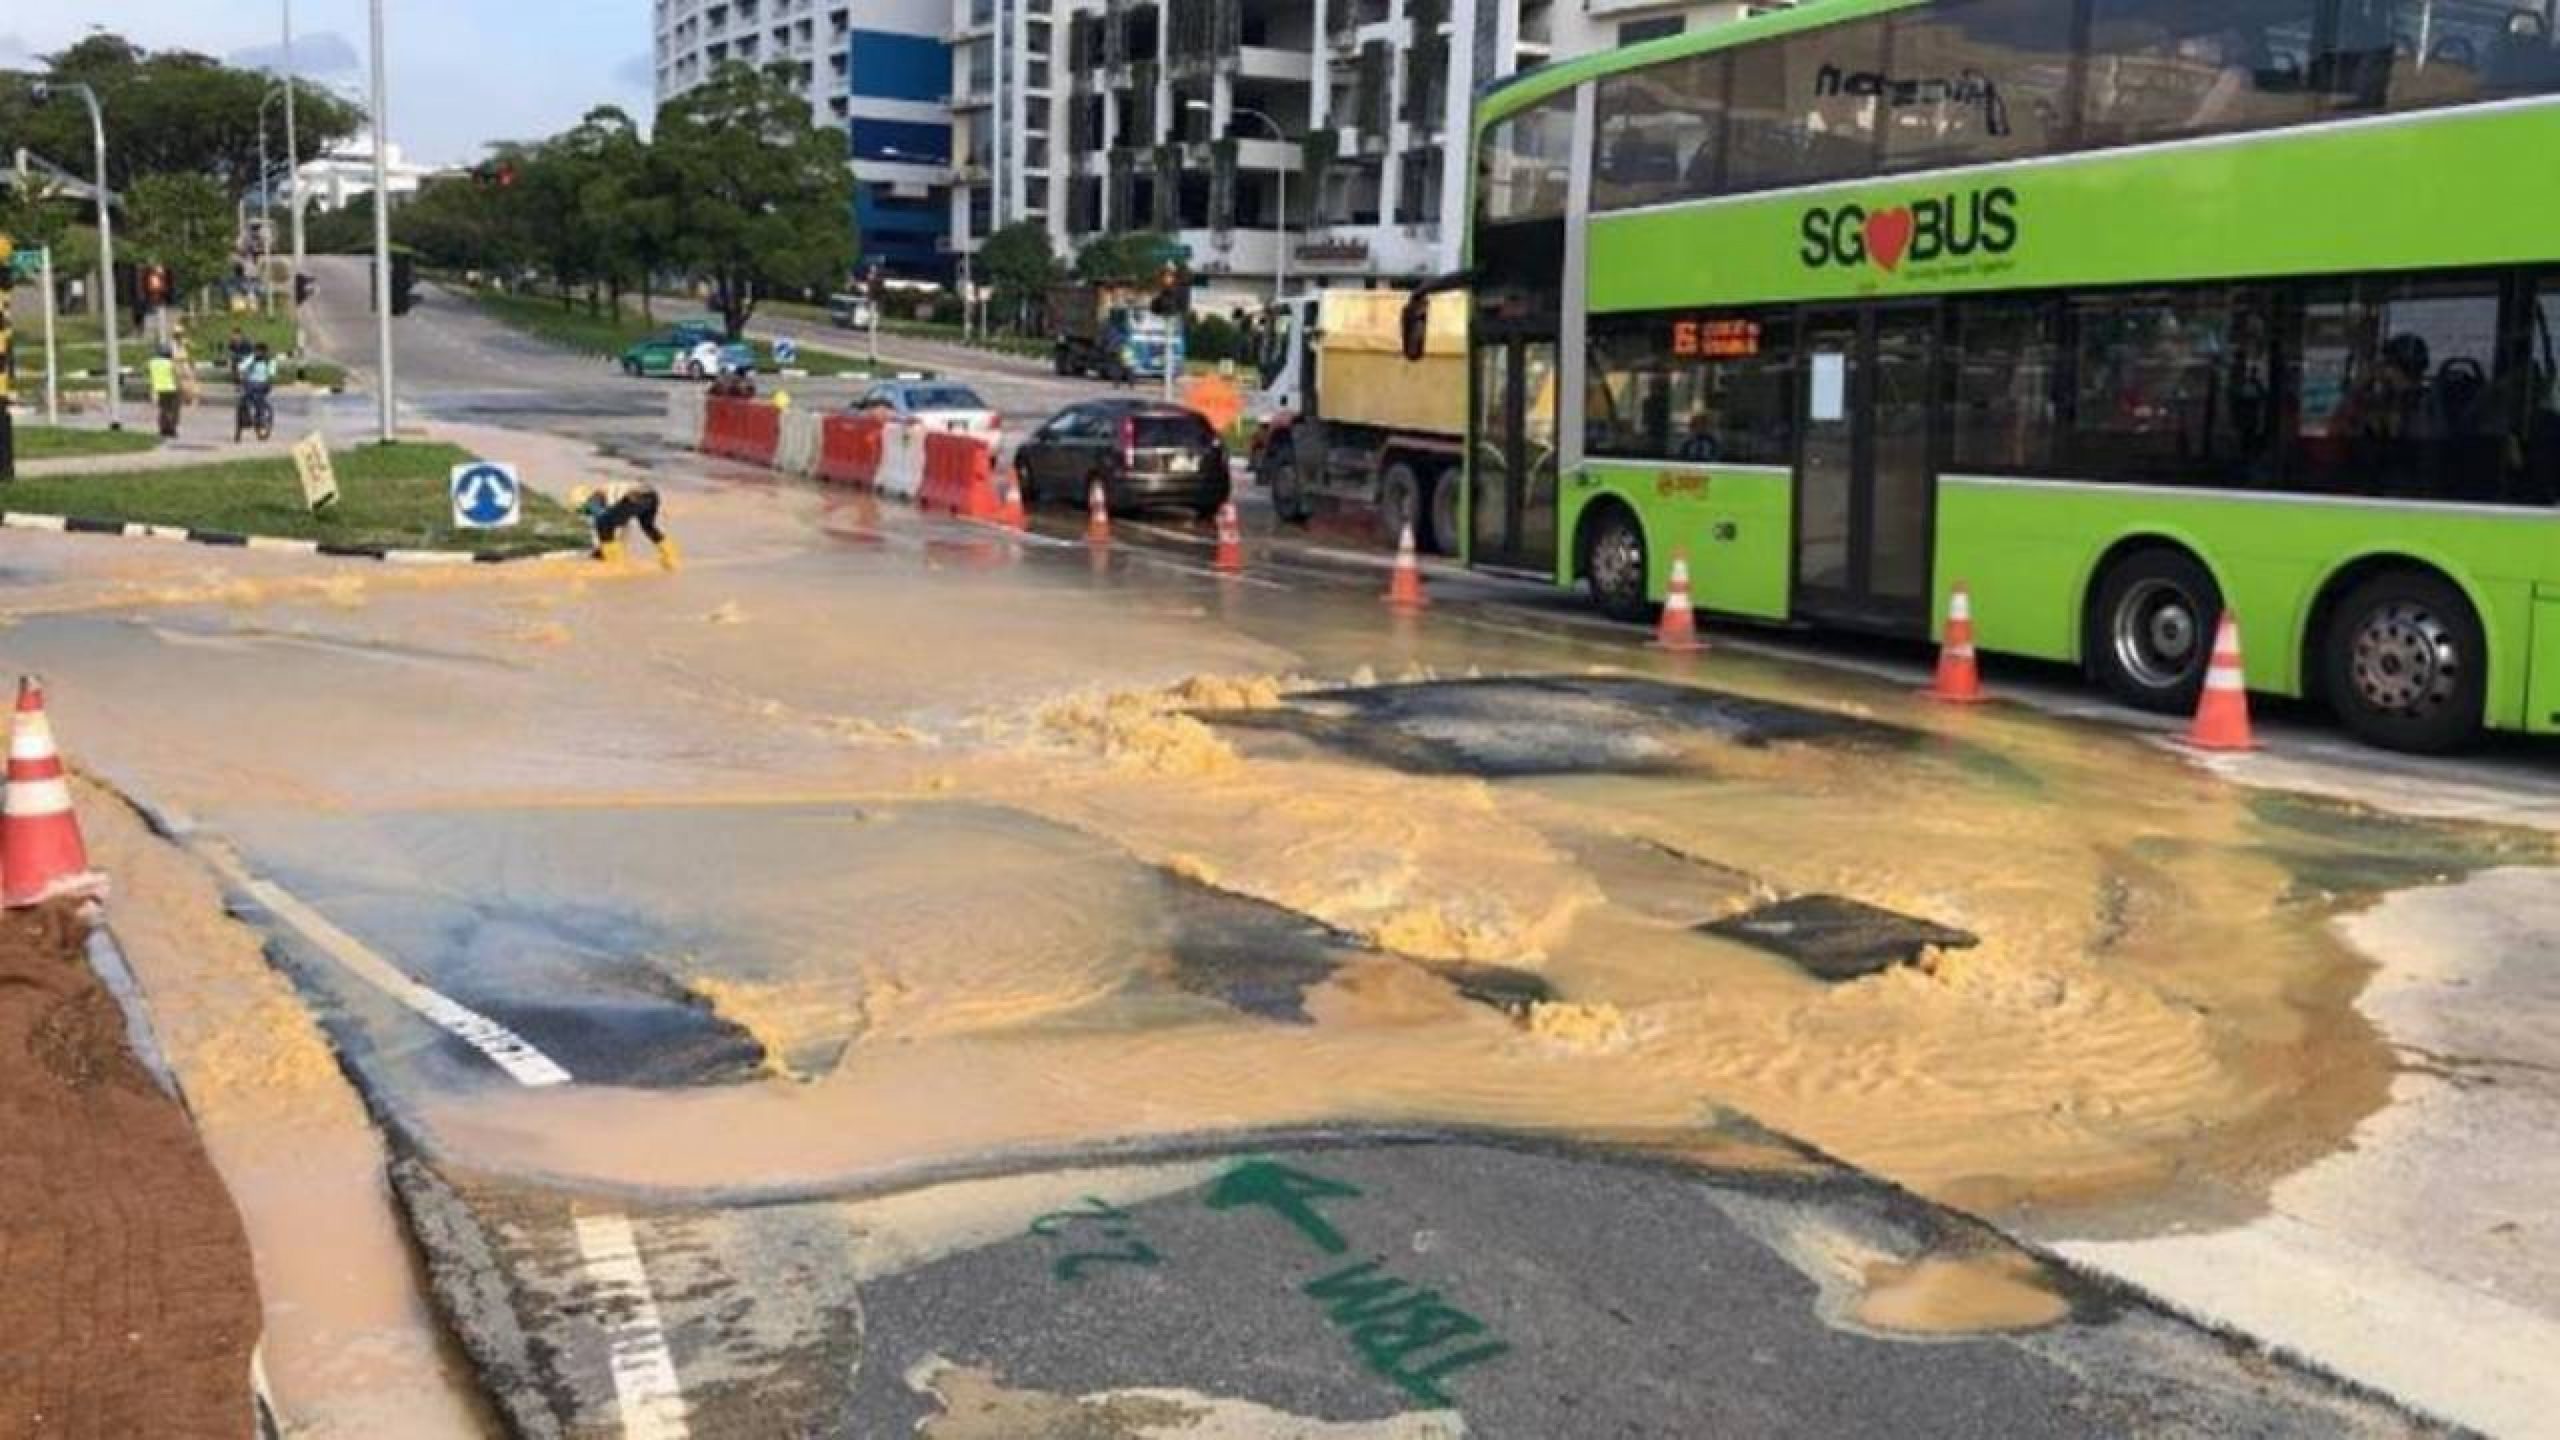 Civil engineering contractor fined for damaging water main; causing loss of 1.8 million litres of water